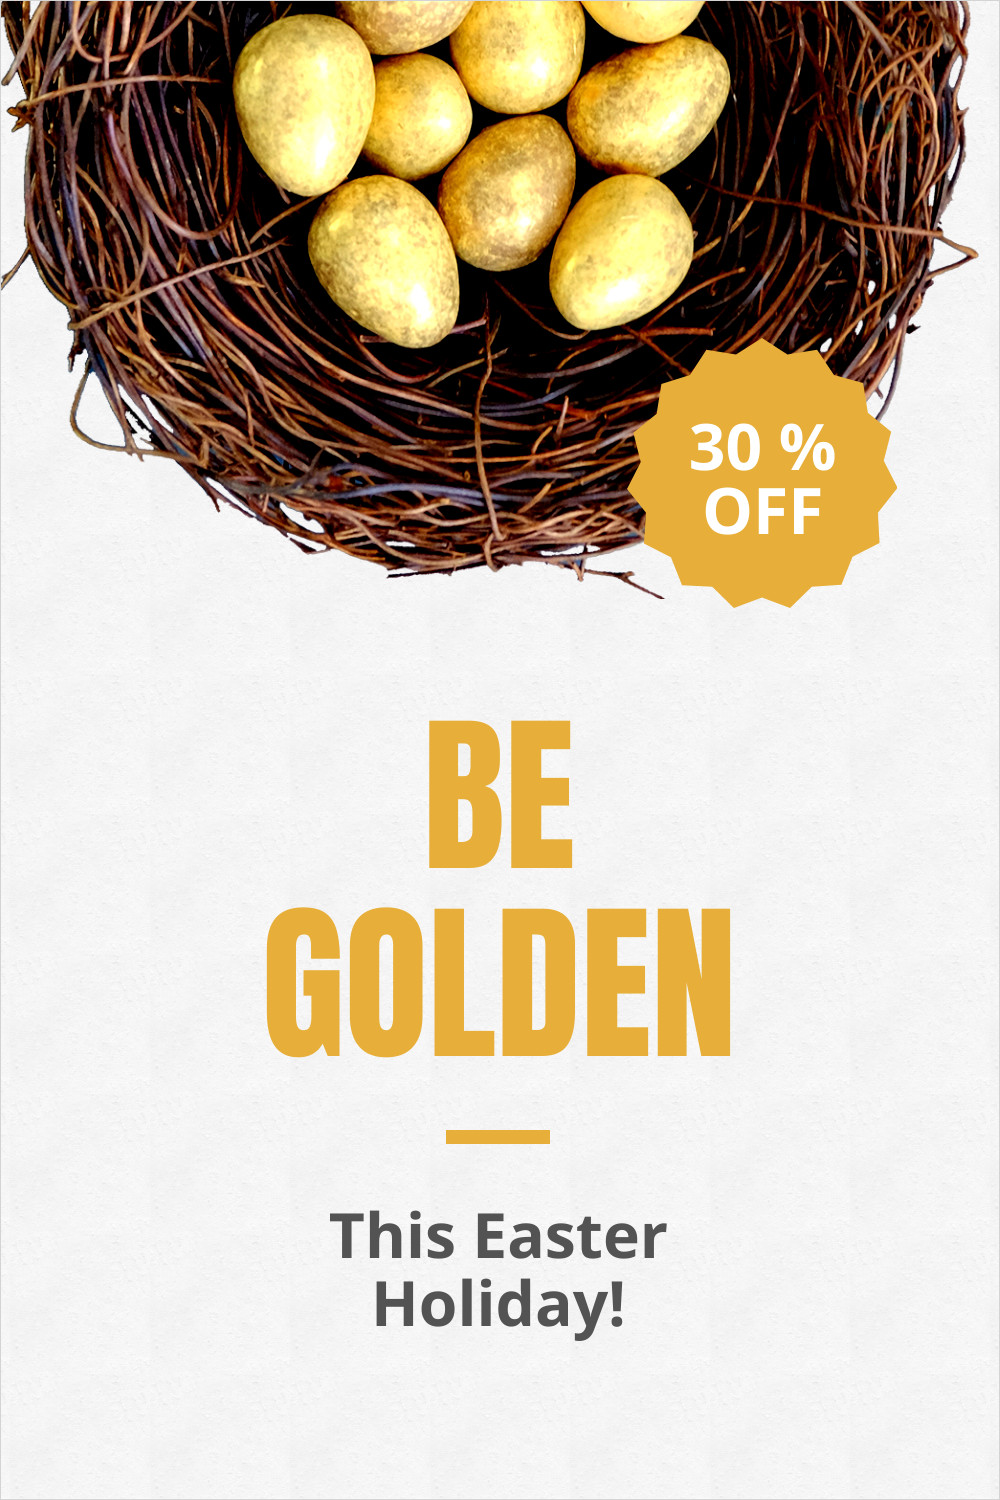 Golden Easter Egg with Promo Inline Rectangle 300x250